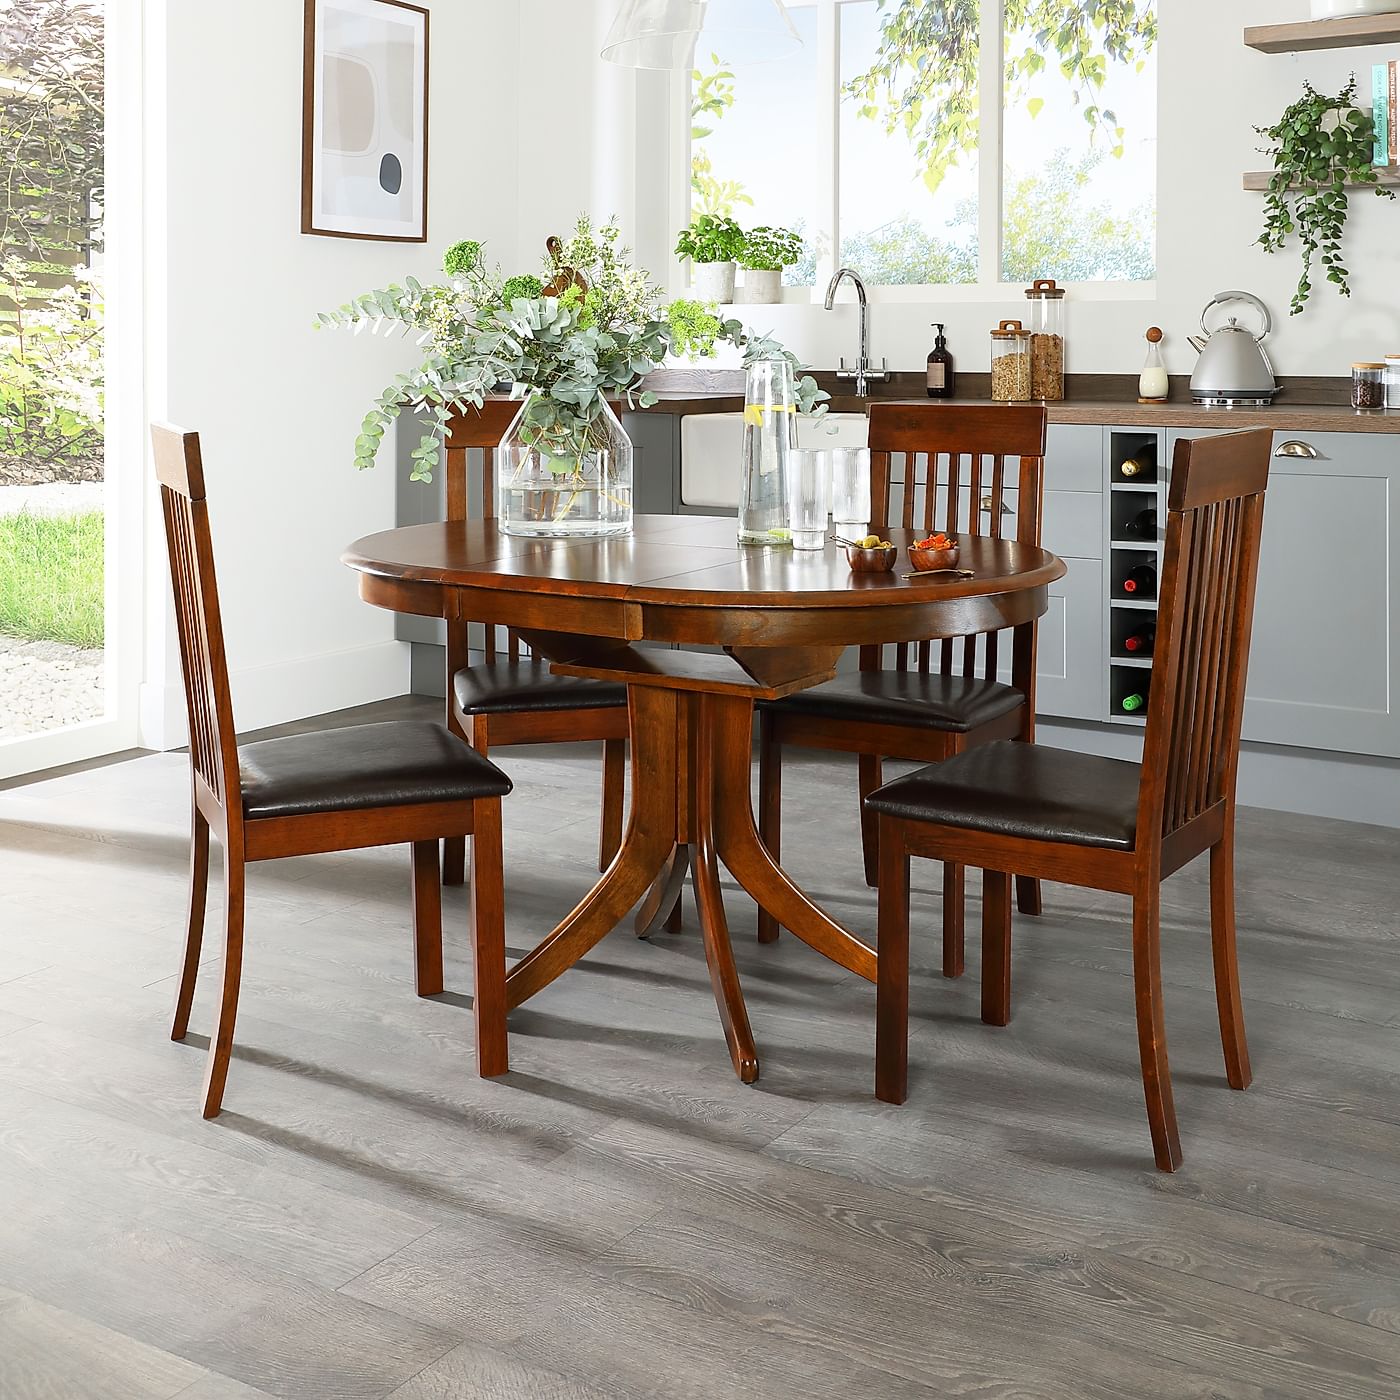 Hudson Round Dark Wood Extending Dining Table with 4 